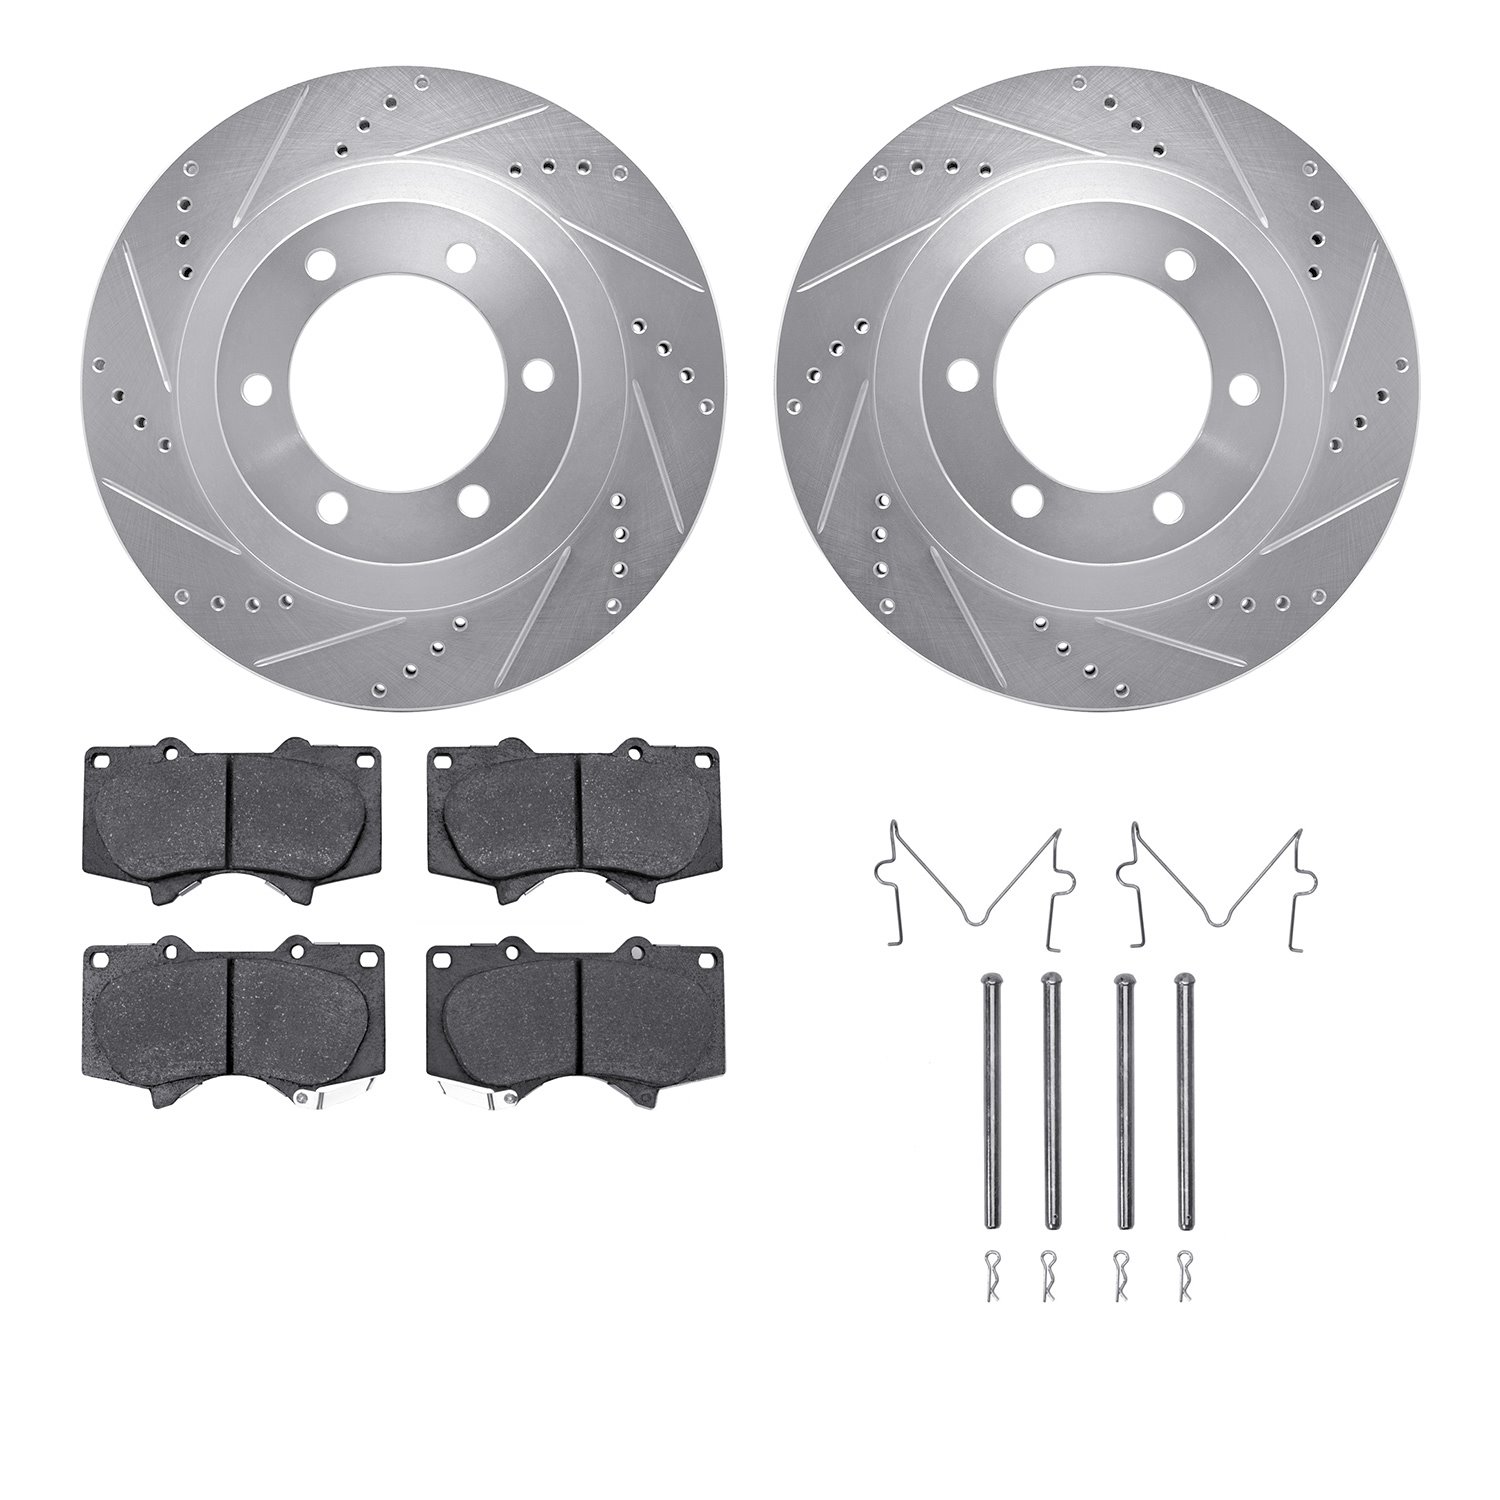 7412-76015 Drilled/Slotted Brake Rotors with Ultimate-Duty Brake Pads Kit & Hardware [Silver], 2003-2009 Lexus/Toyota/Scion, Pos